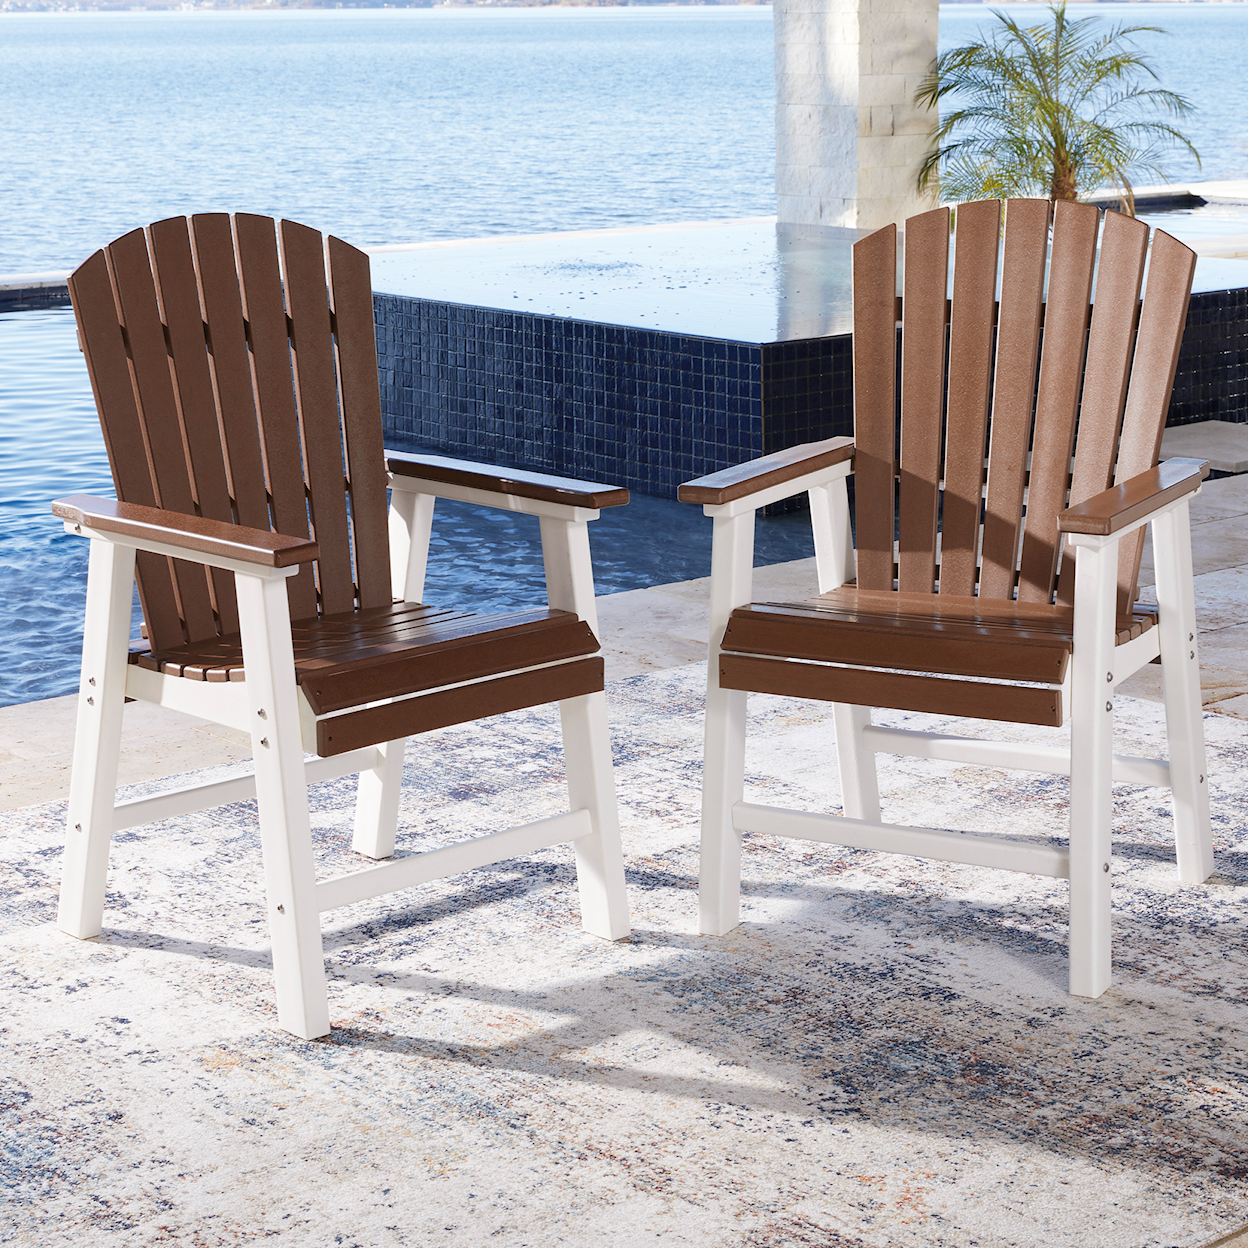 Ashley Furniture Signature Design Genesis Bay Outdoor Dining Arm Chair (Set of 2)